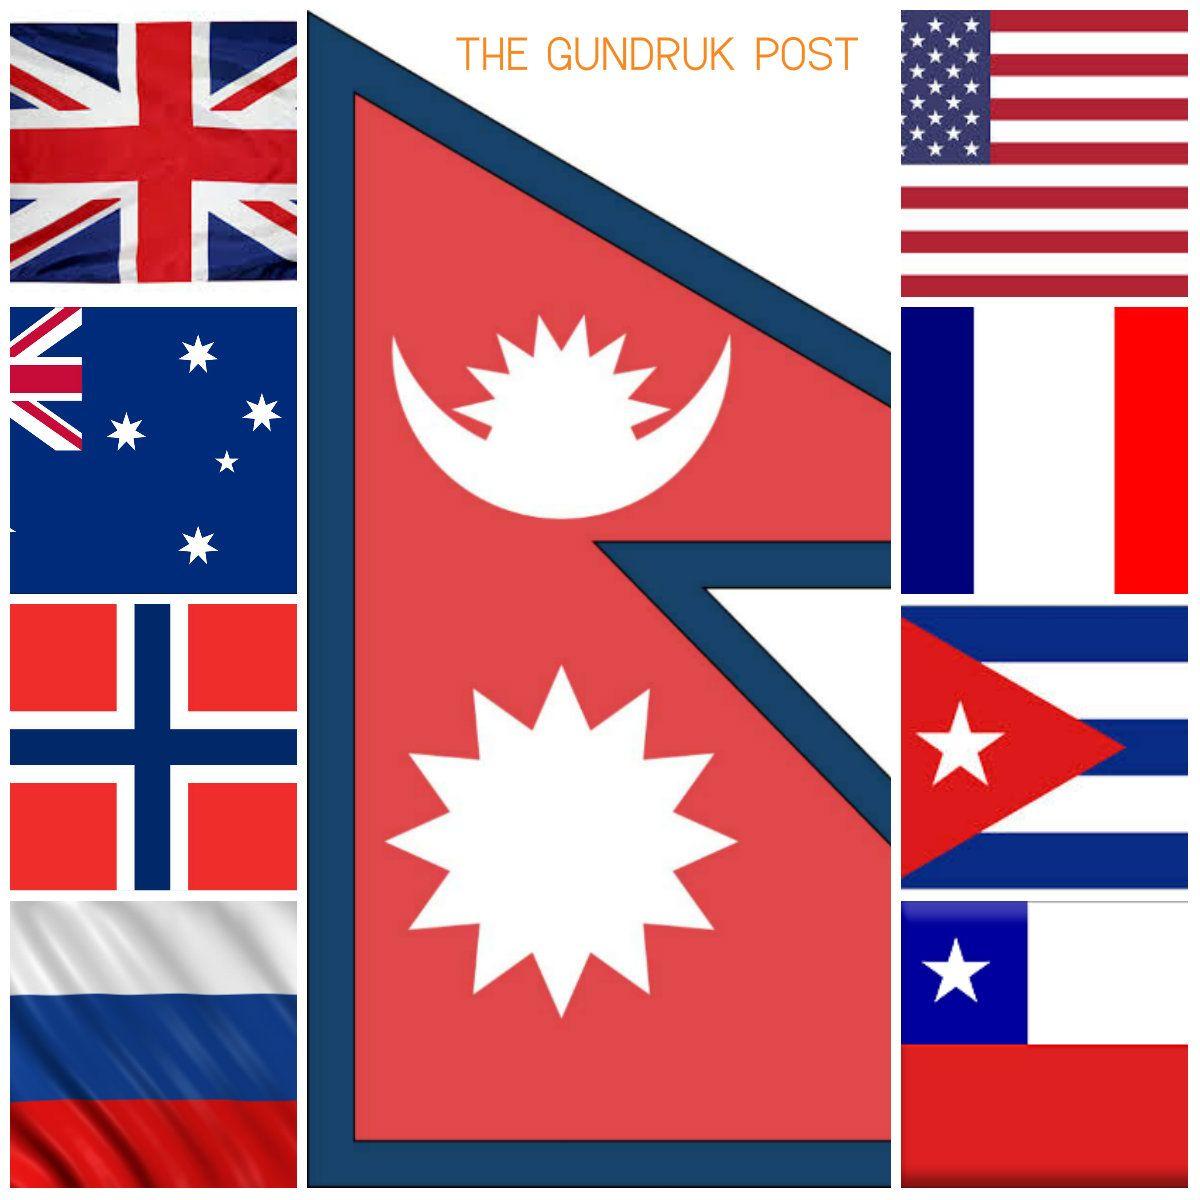 Red White and Blue Flag Logo - INTERESTING! NEPAL SHARE RED WHITE BLUE FLAG COLORS WITH USA, UK